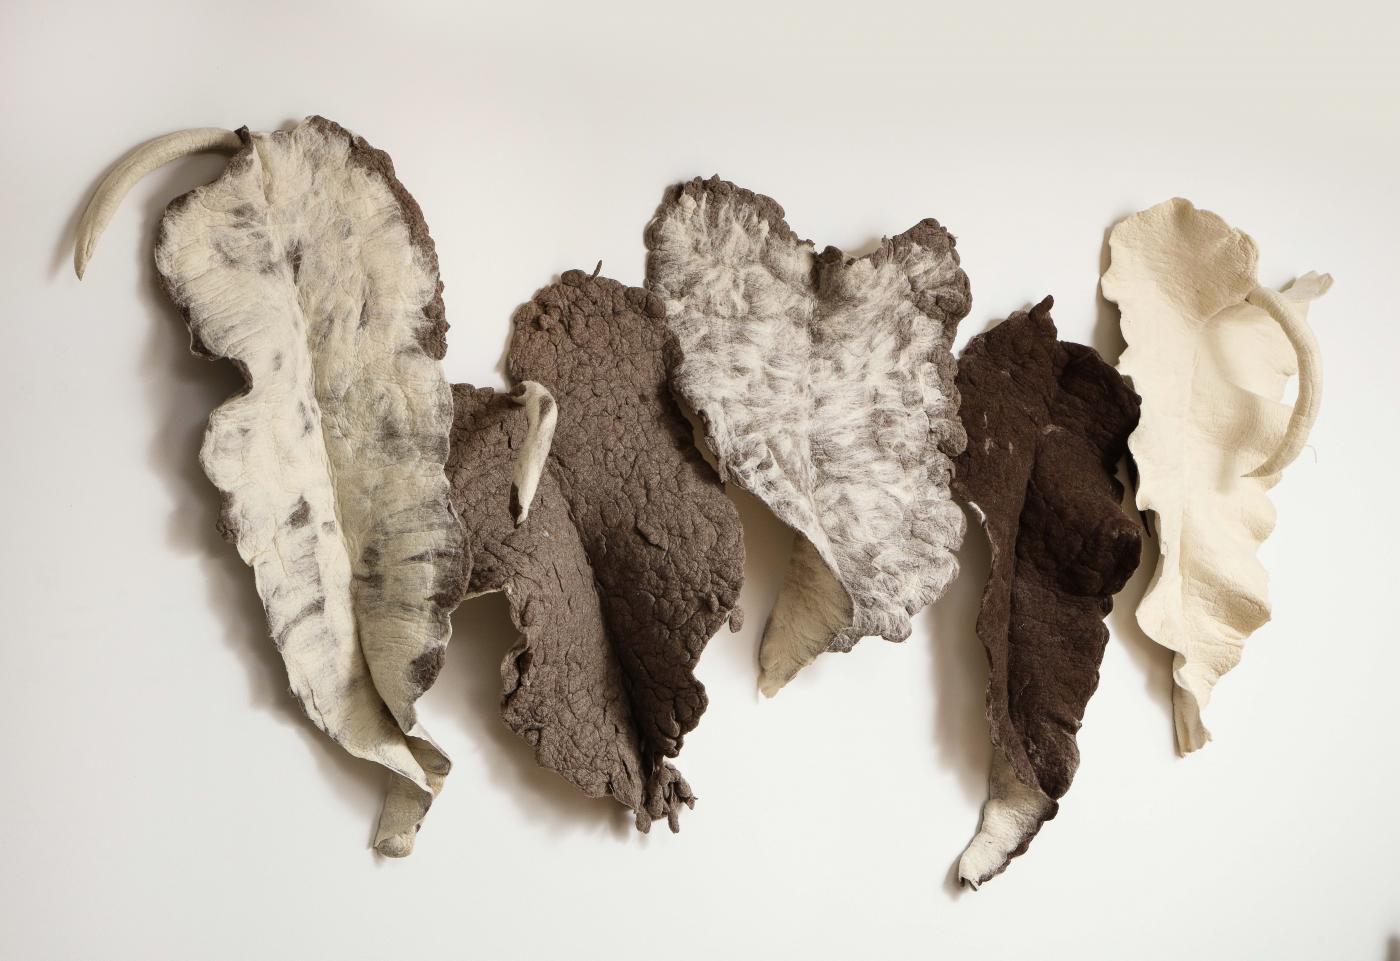 Brazilian Giant Leaf, Naturally Dyed Felted Wool Sculpture by Inês Schertel, Brazil, 2019 For Sale